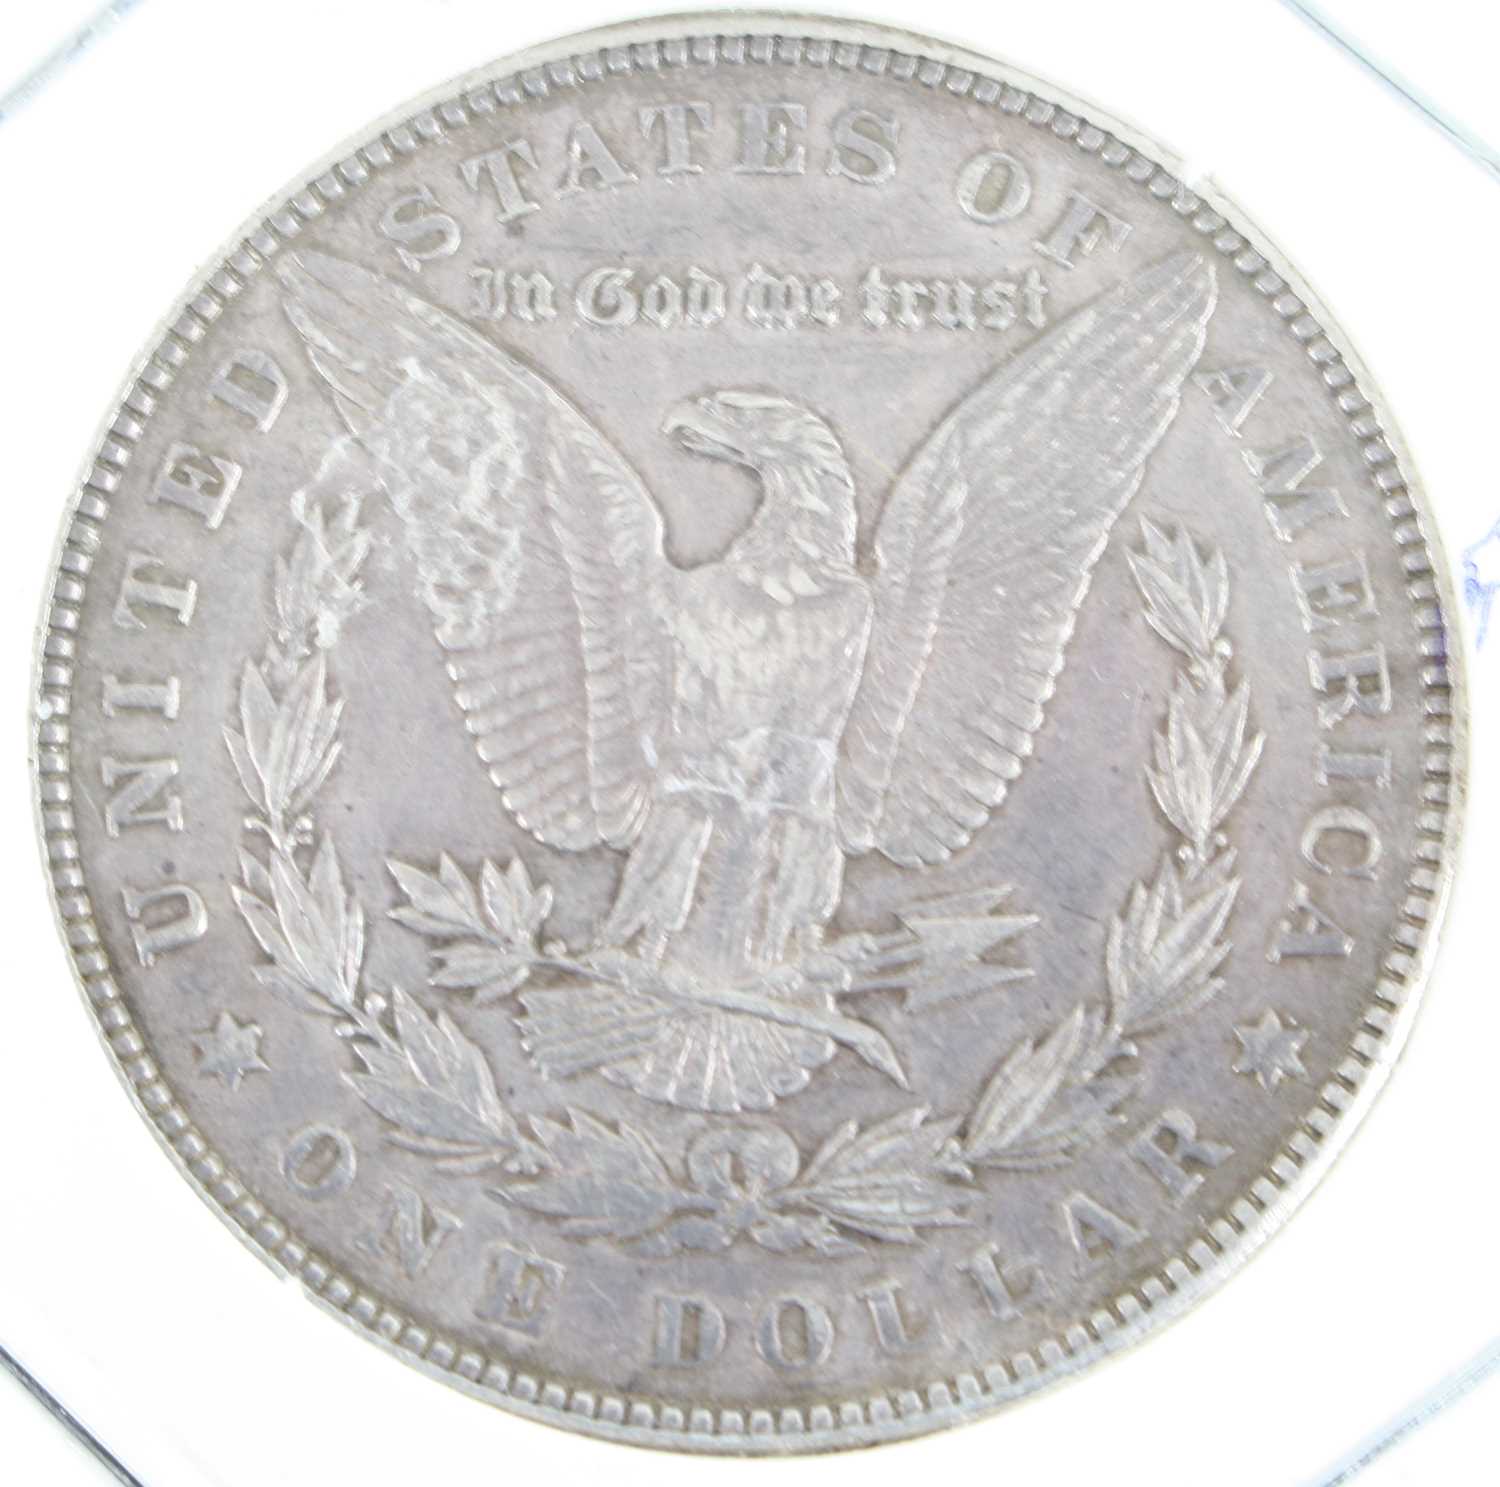 United States of America, 1881 Morgan dollar, obv: Liberty bust left above date, rev: eagle - Image 7 of 7